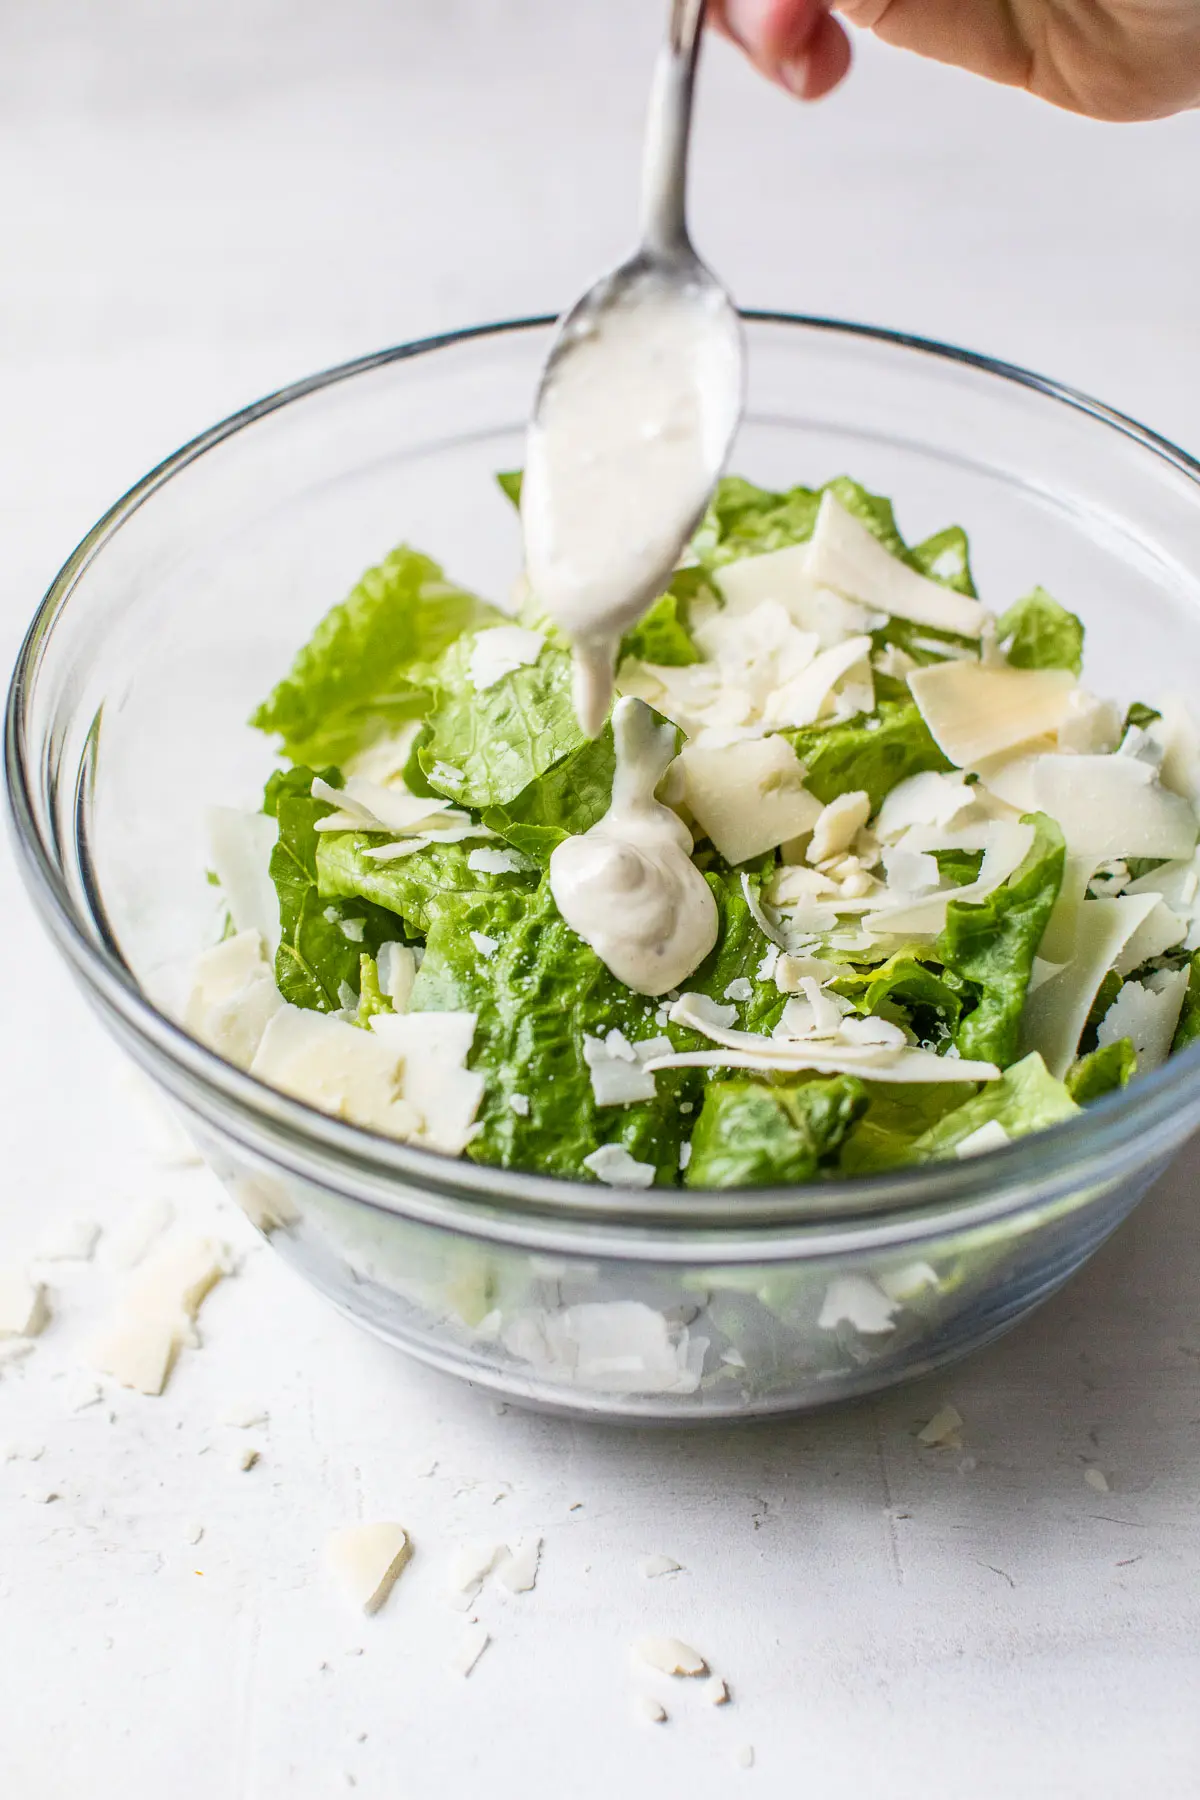 bowl of romaine lettuce drizzled with homemade dressing